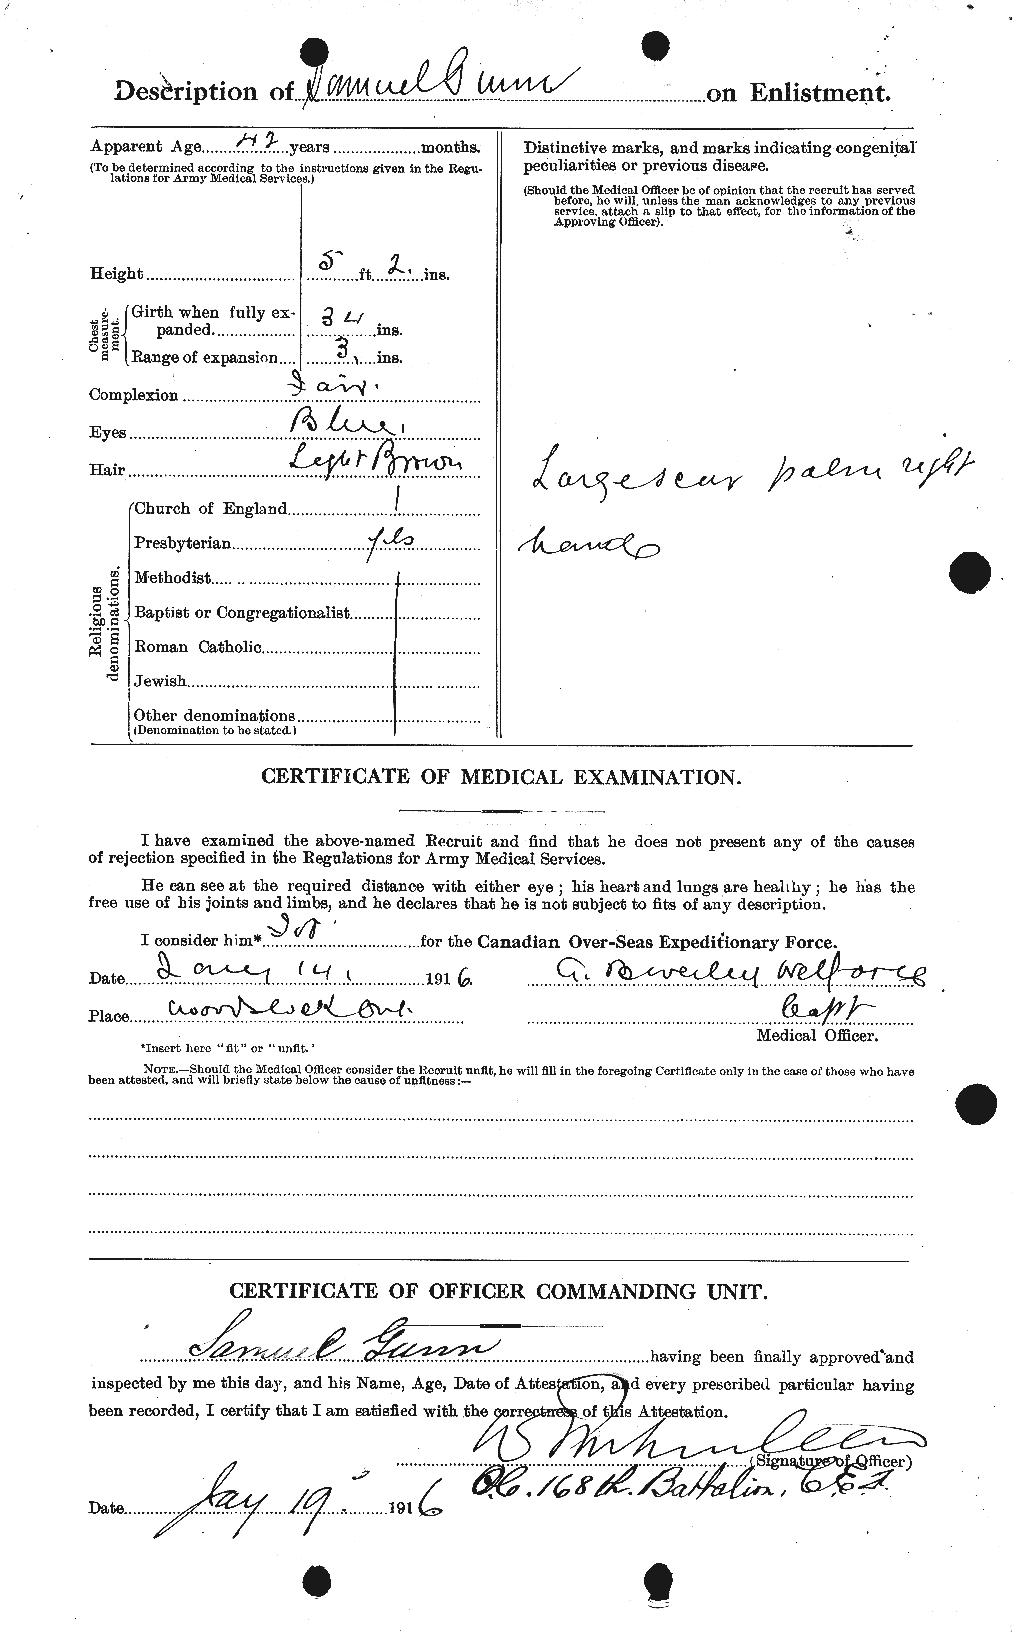 Personnel Records of the First World War - CEF 369330b